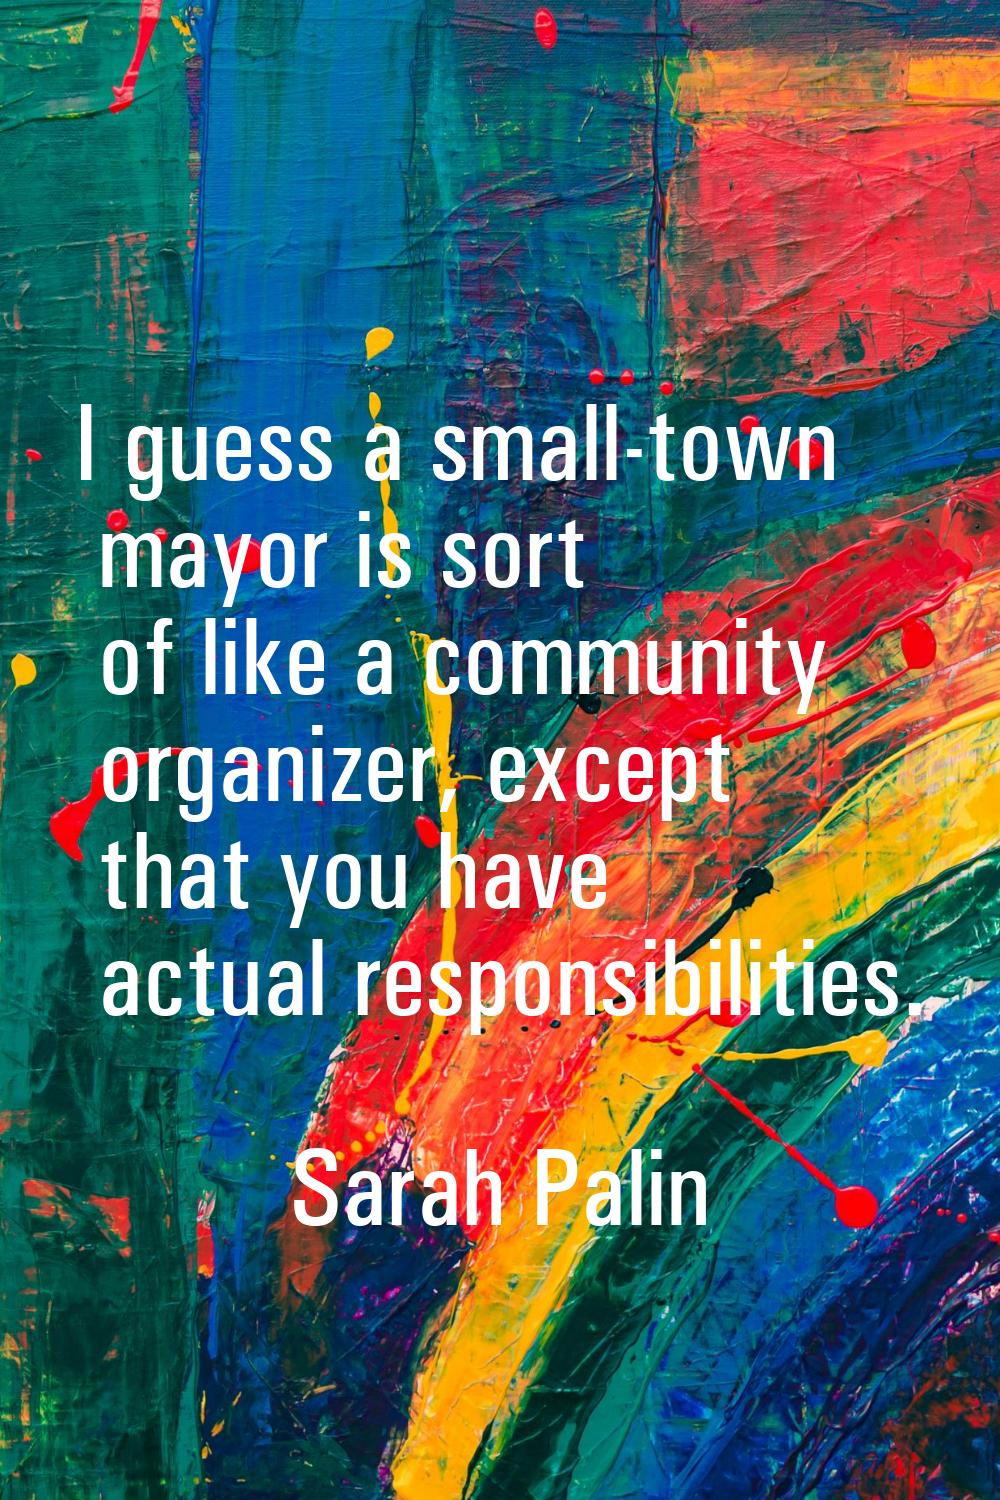 I guess a small-town mayor is sort of like a community organizer, except that you have actual respo